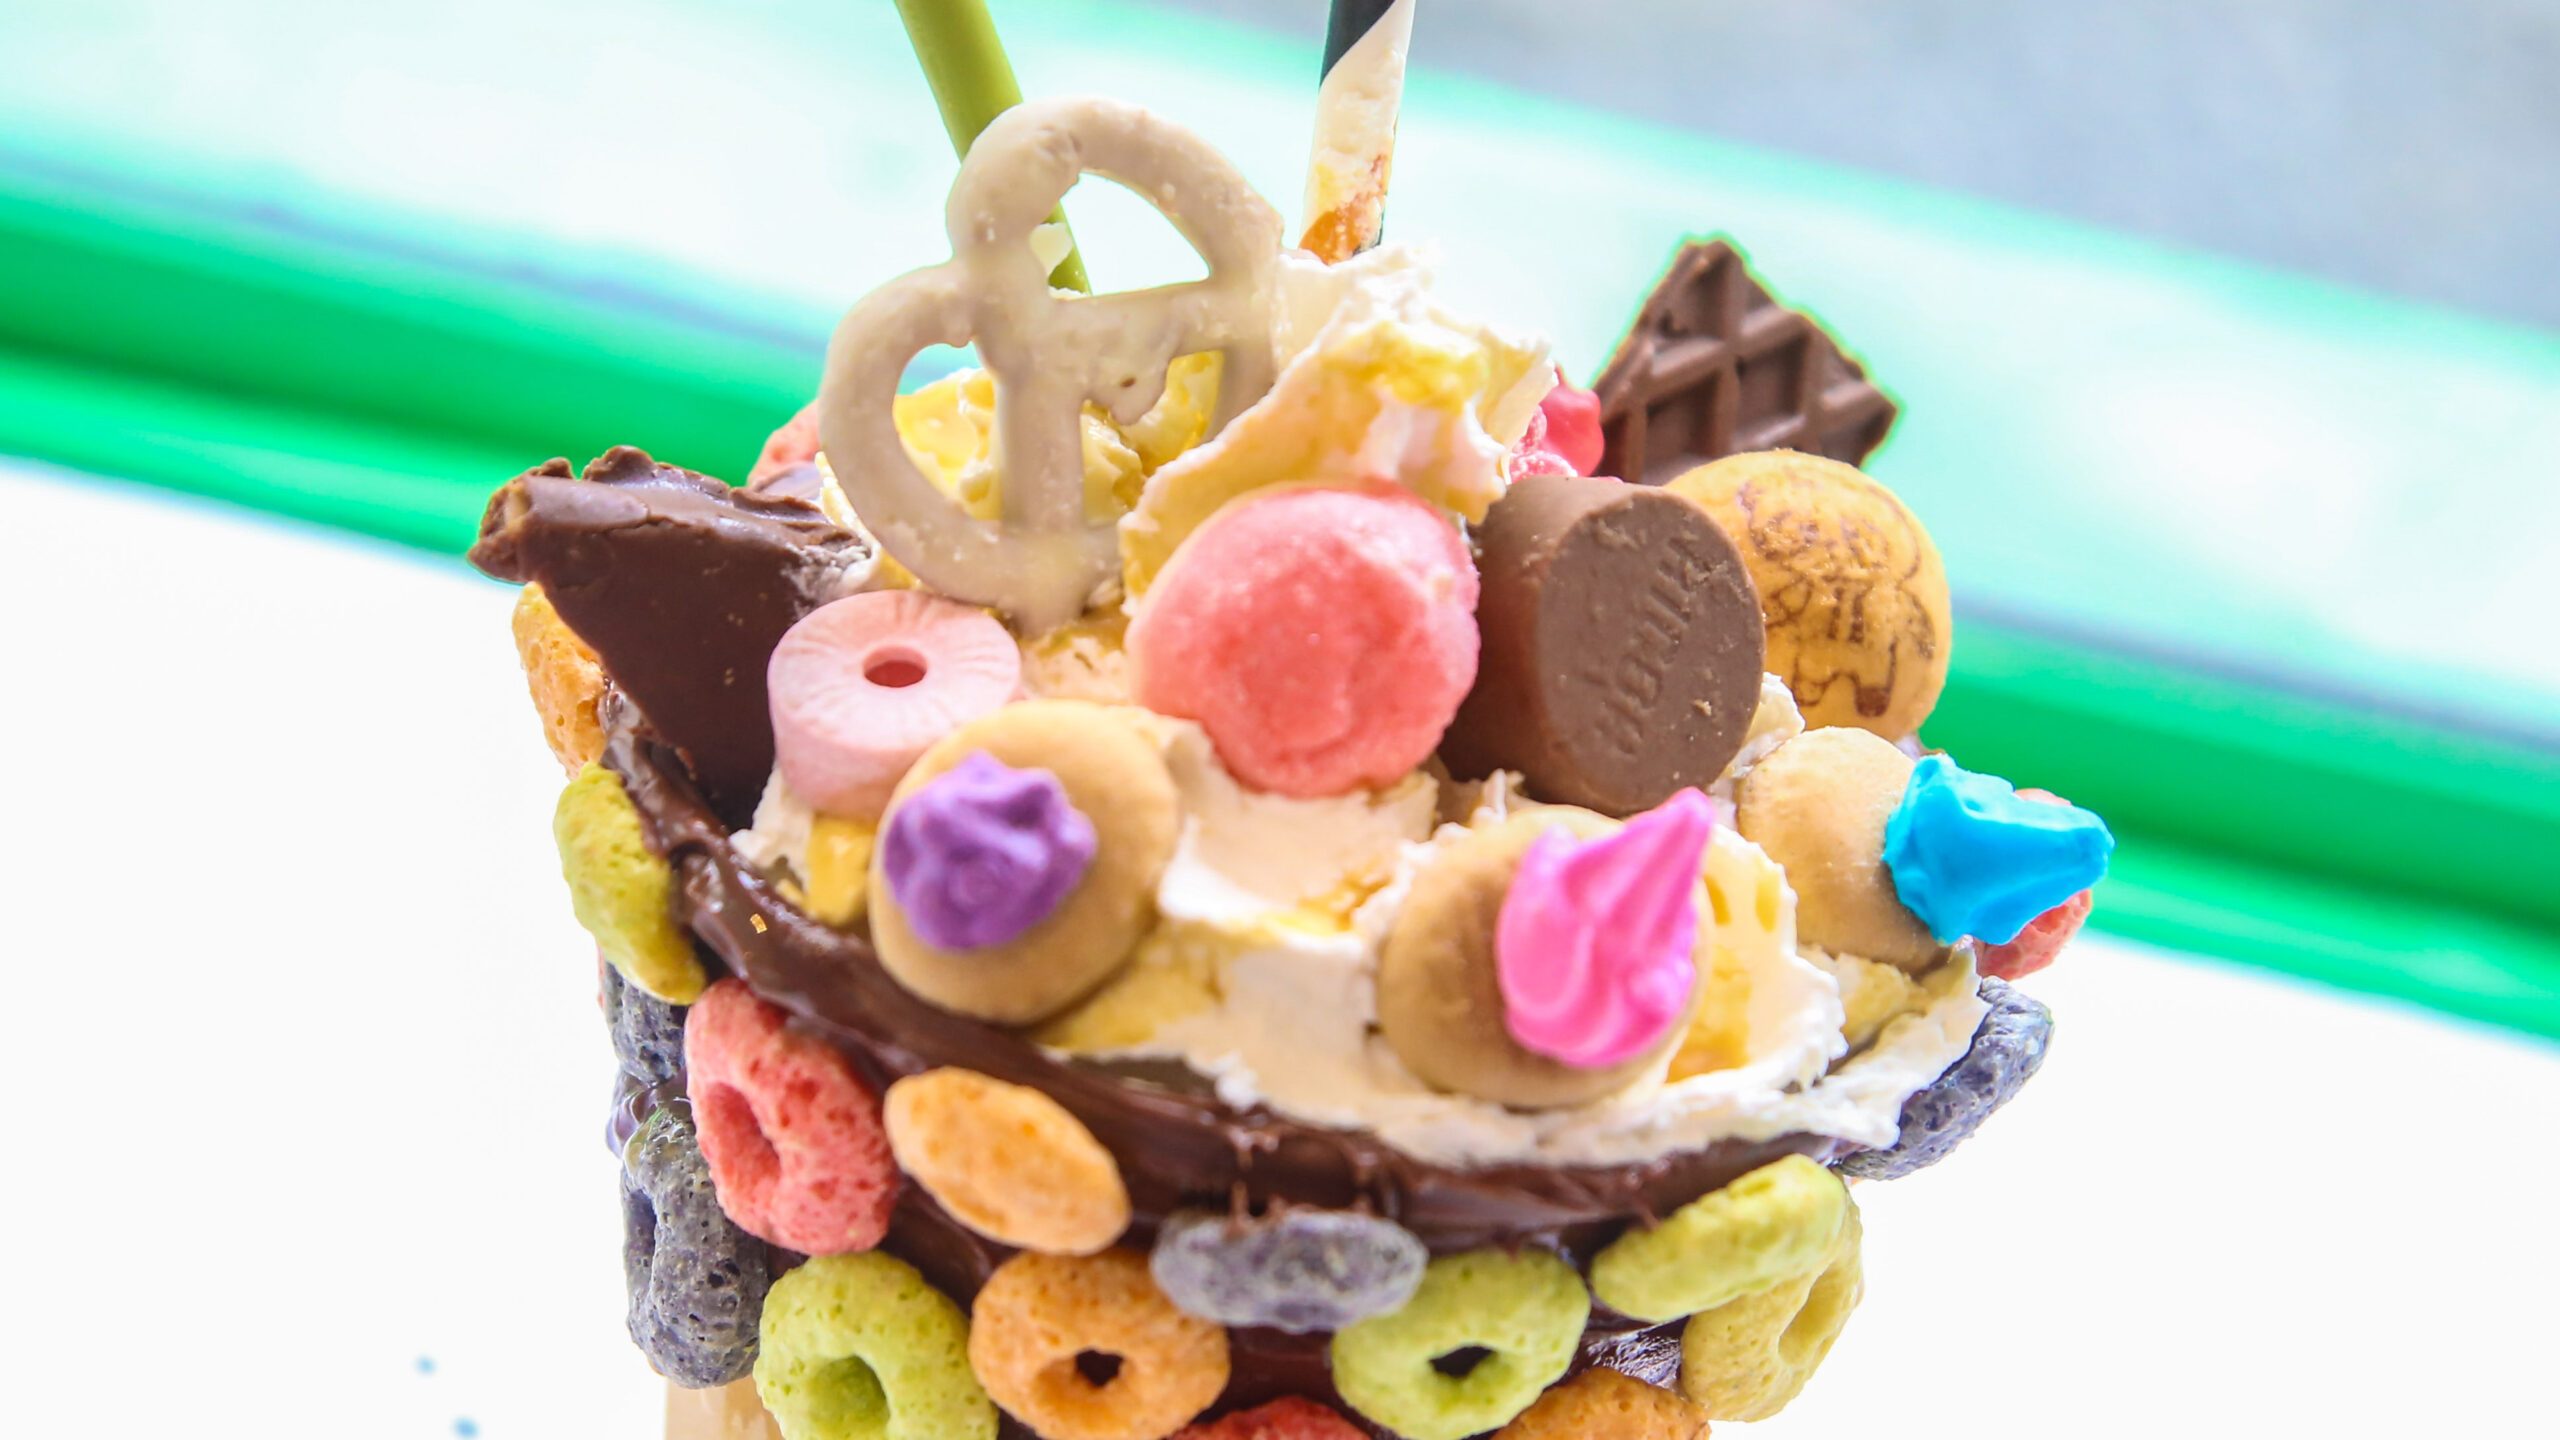 [What I Ate] This milkshake is made of every candy from your childhood